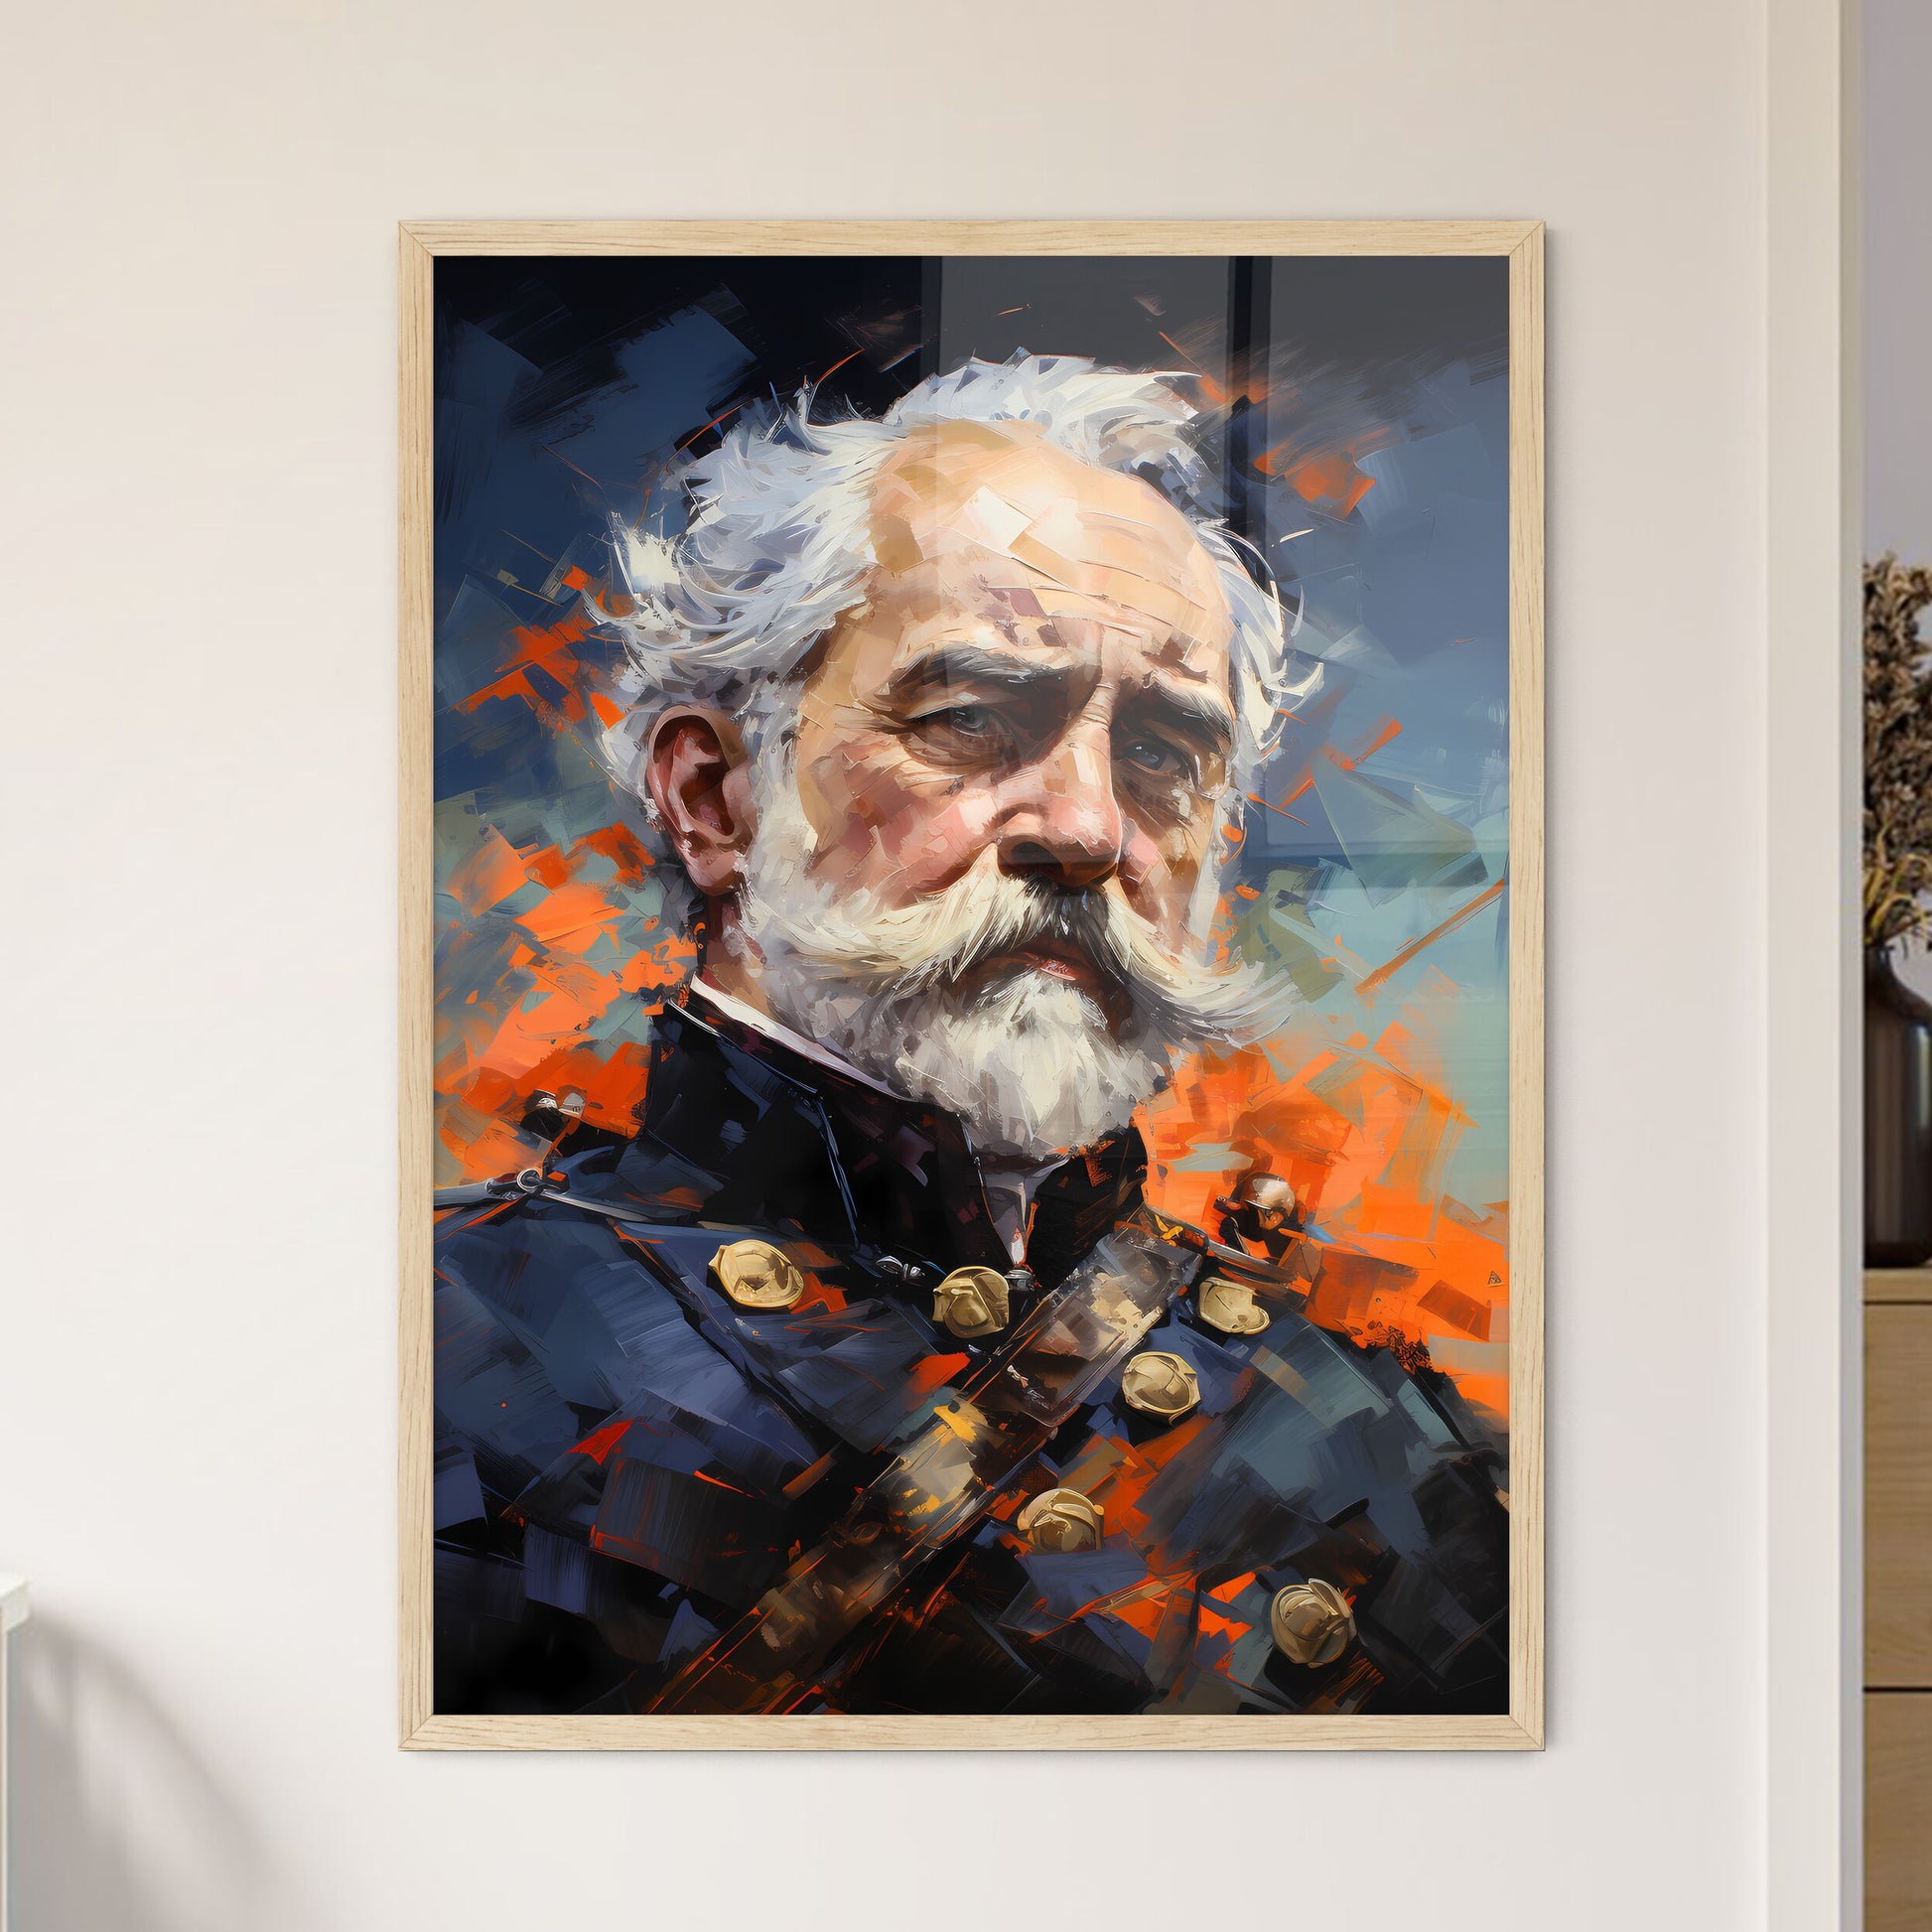 Robert E. Lee - A Man With A White Beard And Mustache Default Title